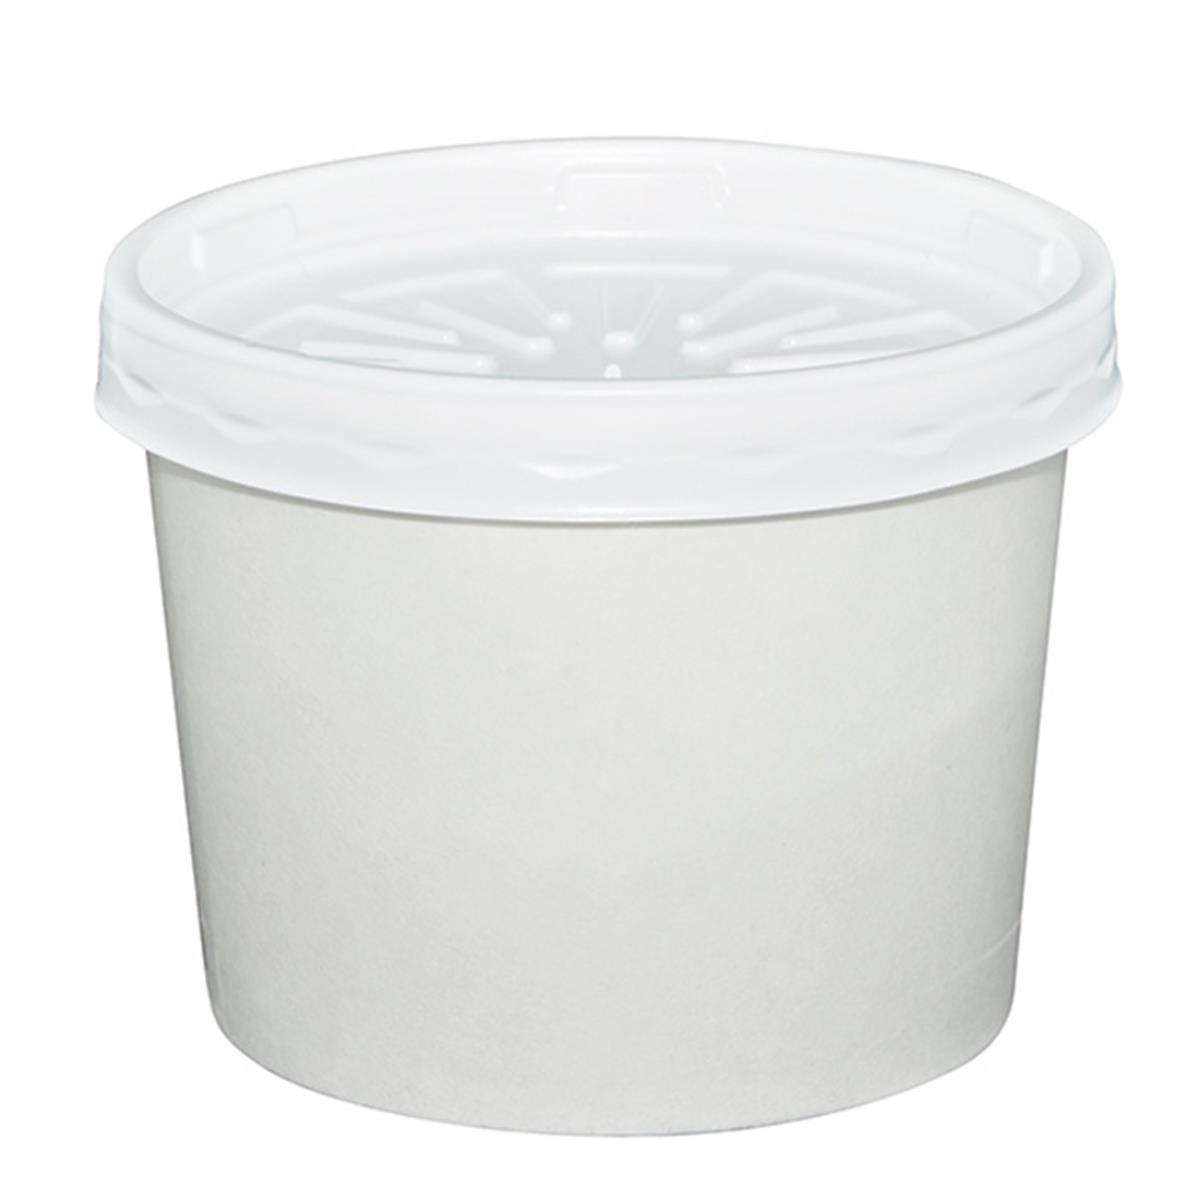 Dopaco D12rbld Pec 12 Oz Soup Container With Lid, White